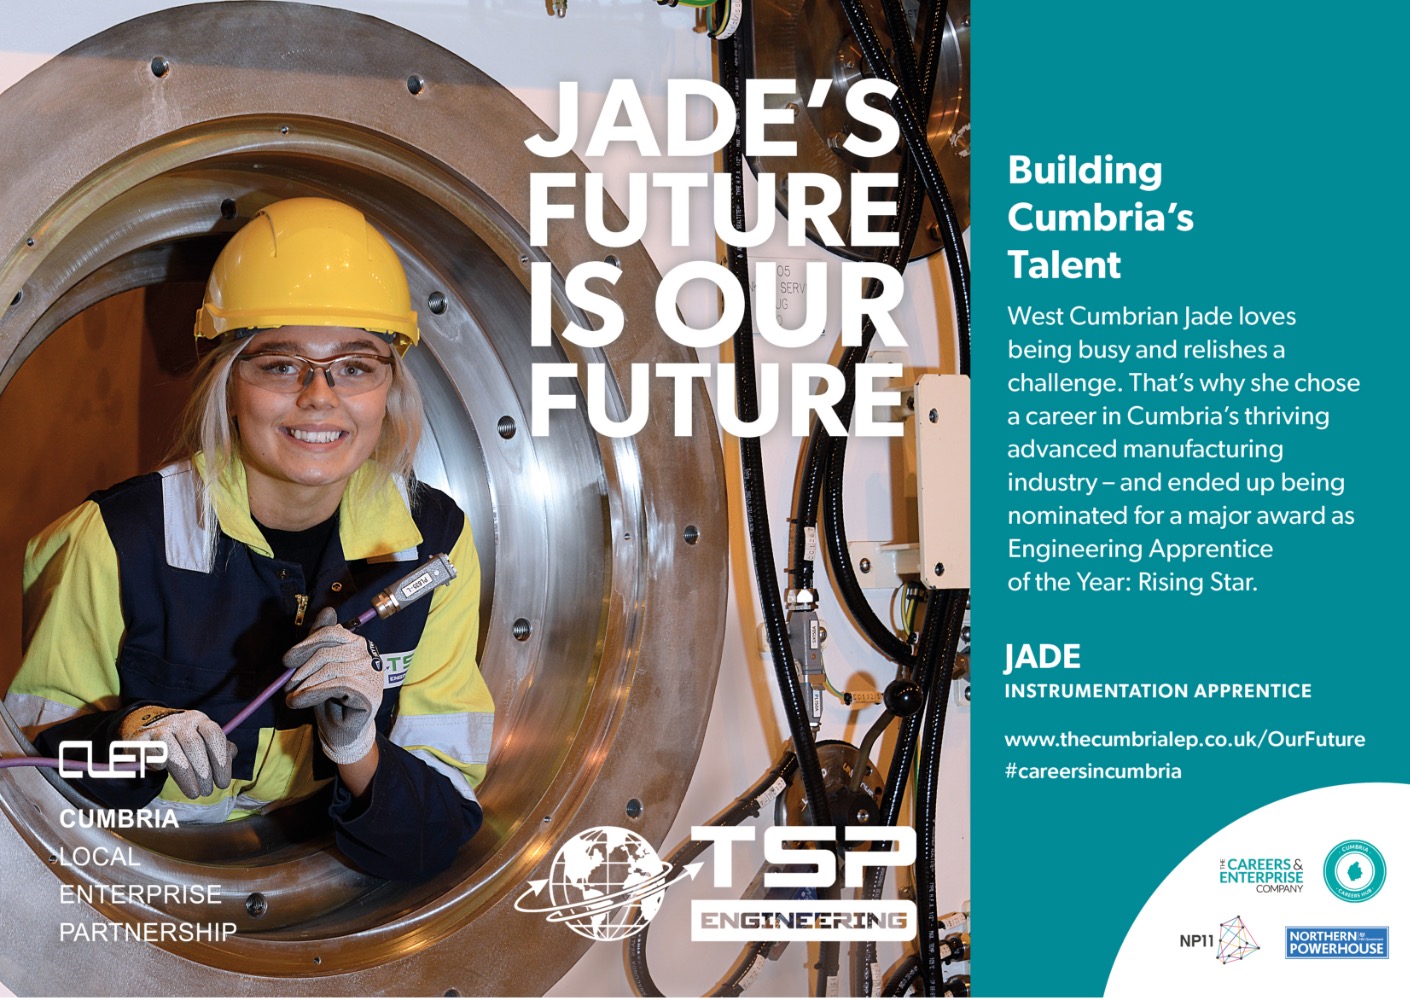 Building Cumbria's Talent - West Cumbrian Jade loves being busy and relishes a challenge. That's why she chose a career in Cumbria's thriving advanced manufacturing industry - and ended up being nominated for a major award as Engineering Apprentice of the Year: Rising Star. (Photo of Jade, instrumentation apprentice).